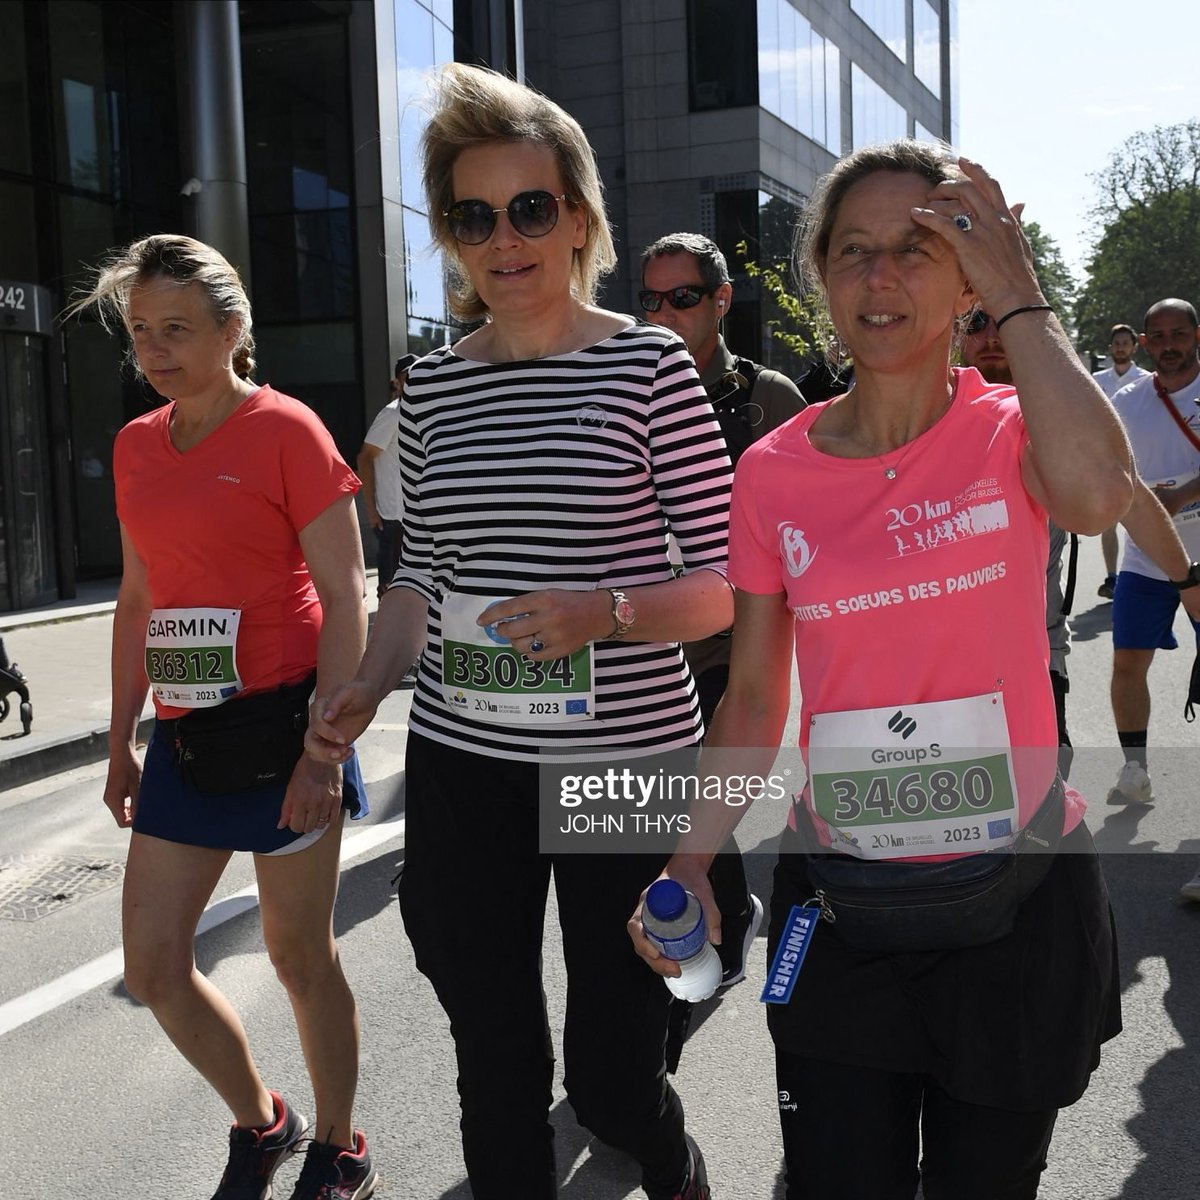 No make up or hairdresser today, just a smile and cool glasses as Queen Mathilde walks 20 kilometers today along with a group of girlfriends, among the many thousands! #20kmbxl